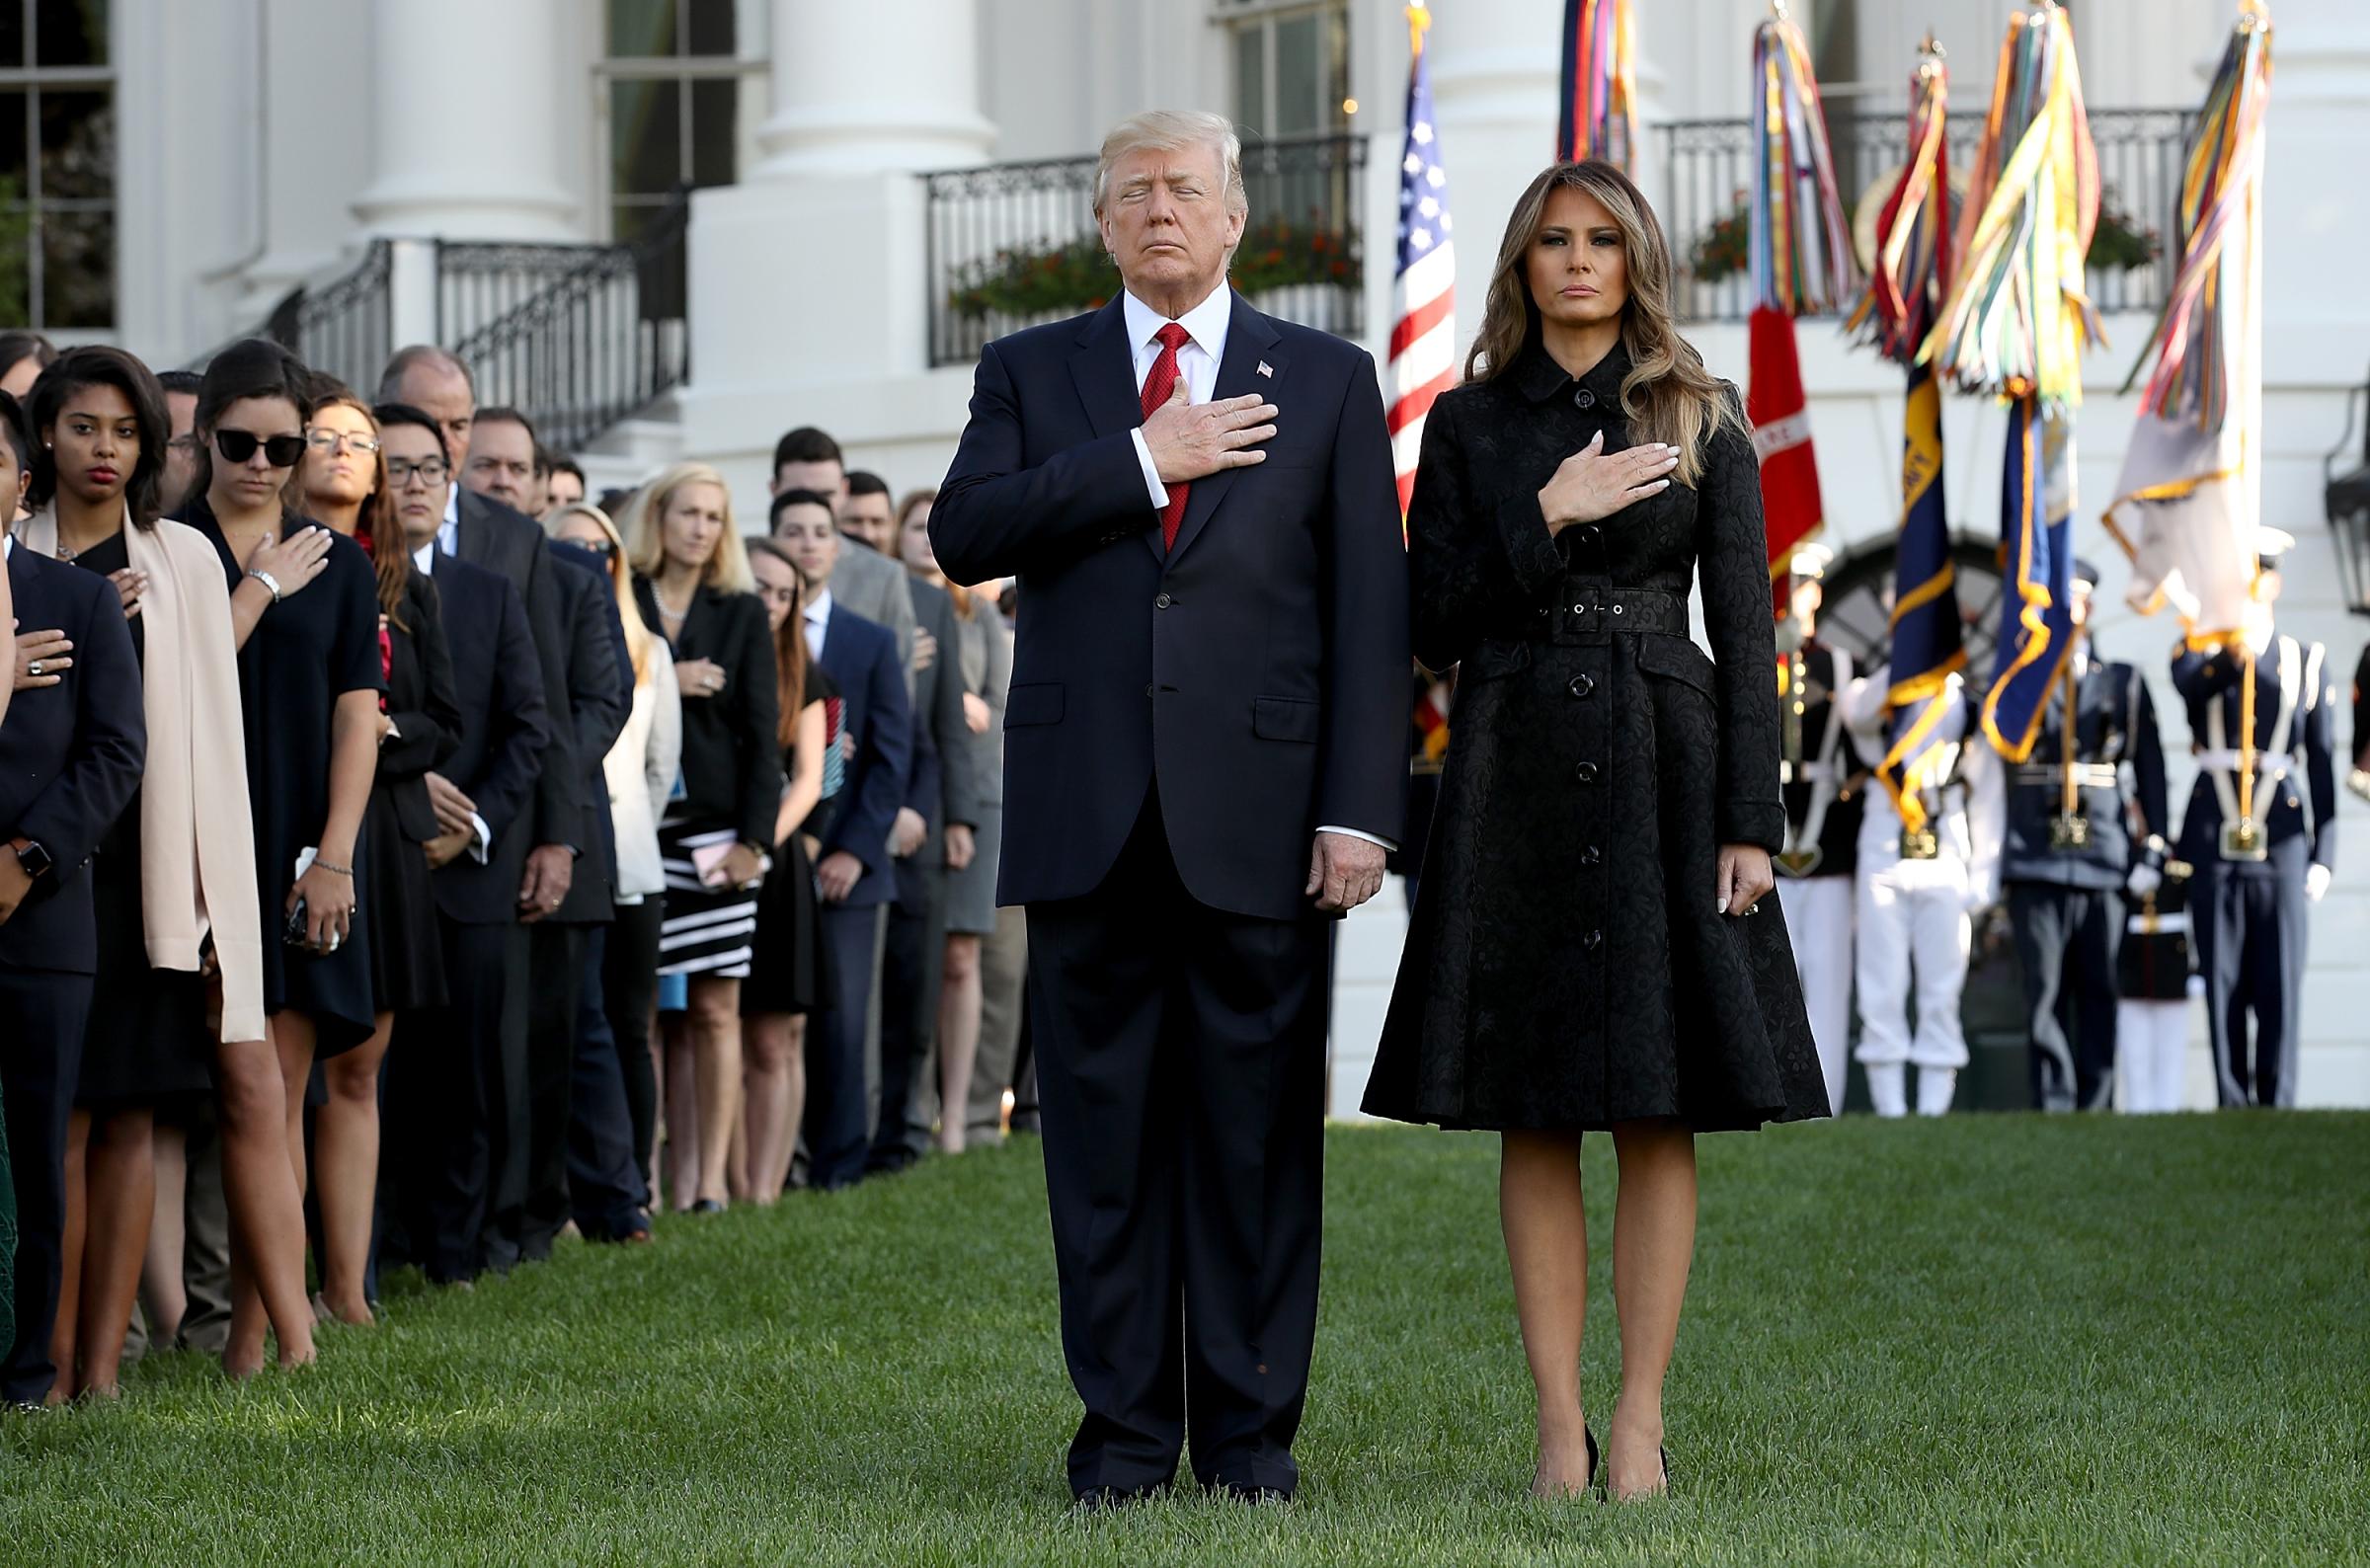 First lady Melania Trump, wear a black, long-sleeved coatdress by Michael Kors during a ceremony marking the September 11 attacks Sept.11, 2017 in Washington, DC.